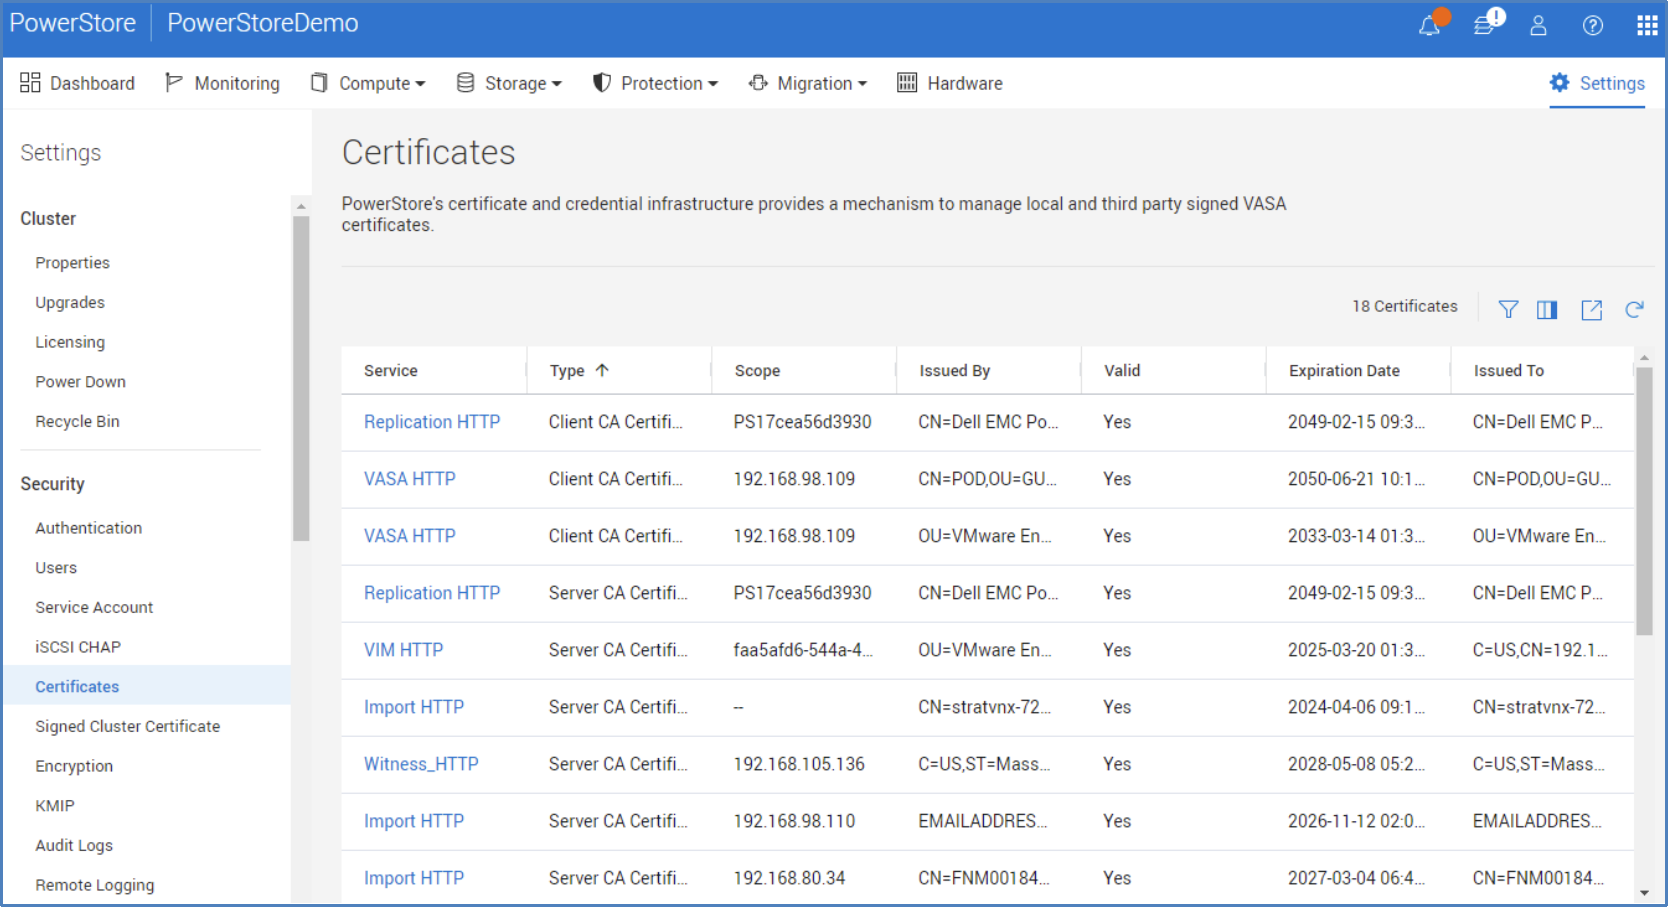 The Certificates page within Settings displays the various certificate and credentials that PowerStore is utilizing.